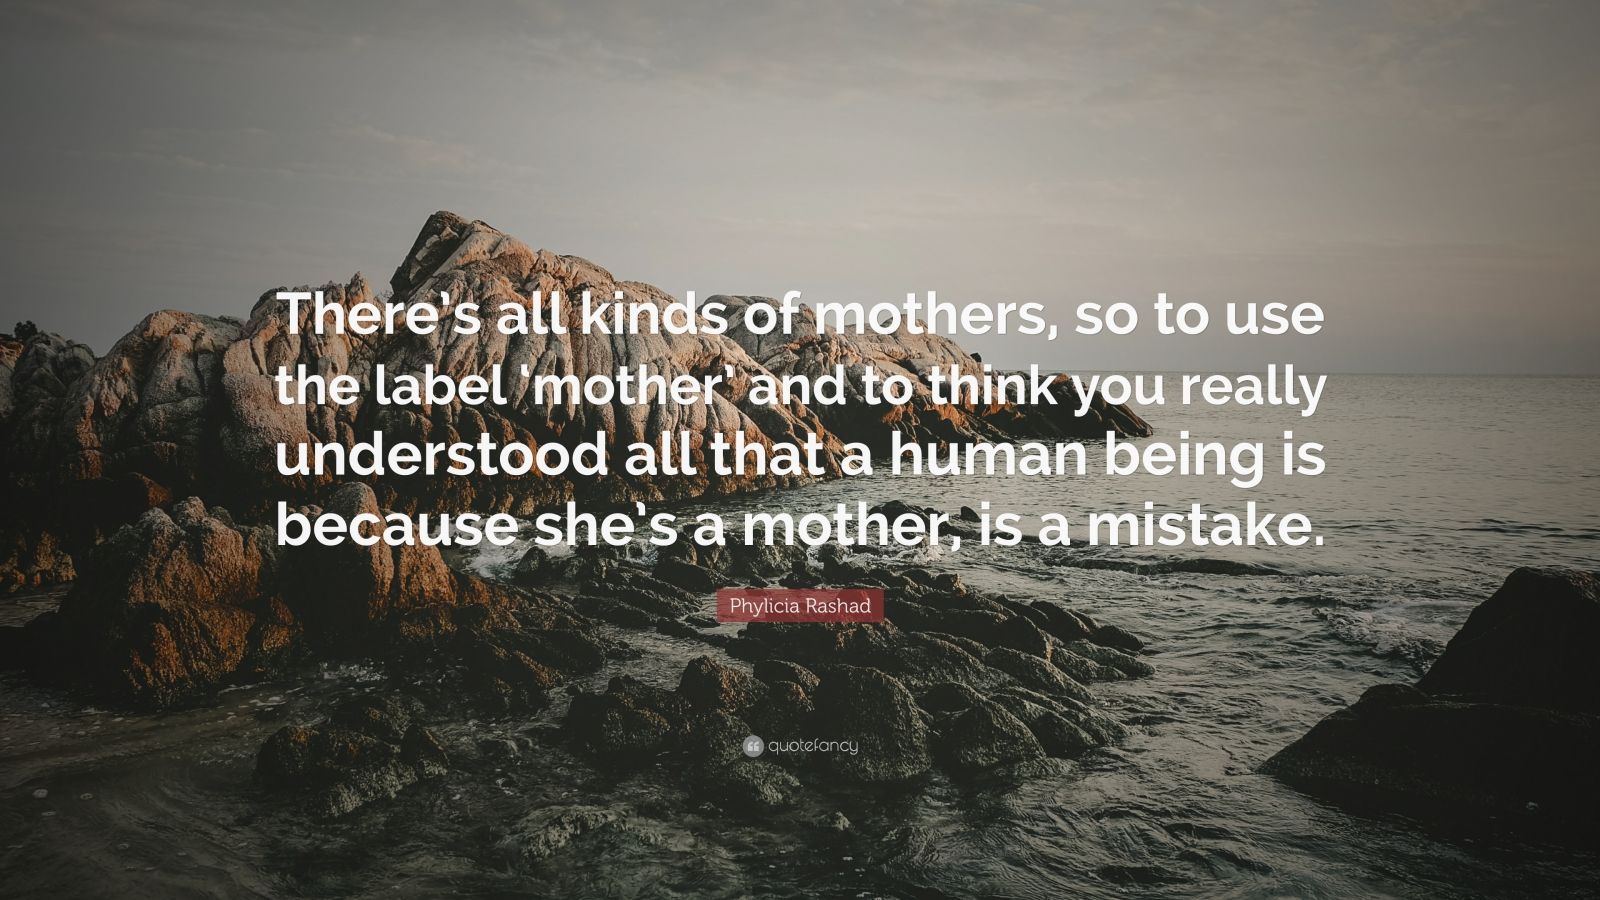 Phylicia Rashad Quote: “There’s all kinds of mothers, so to use the ...